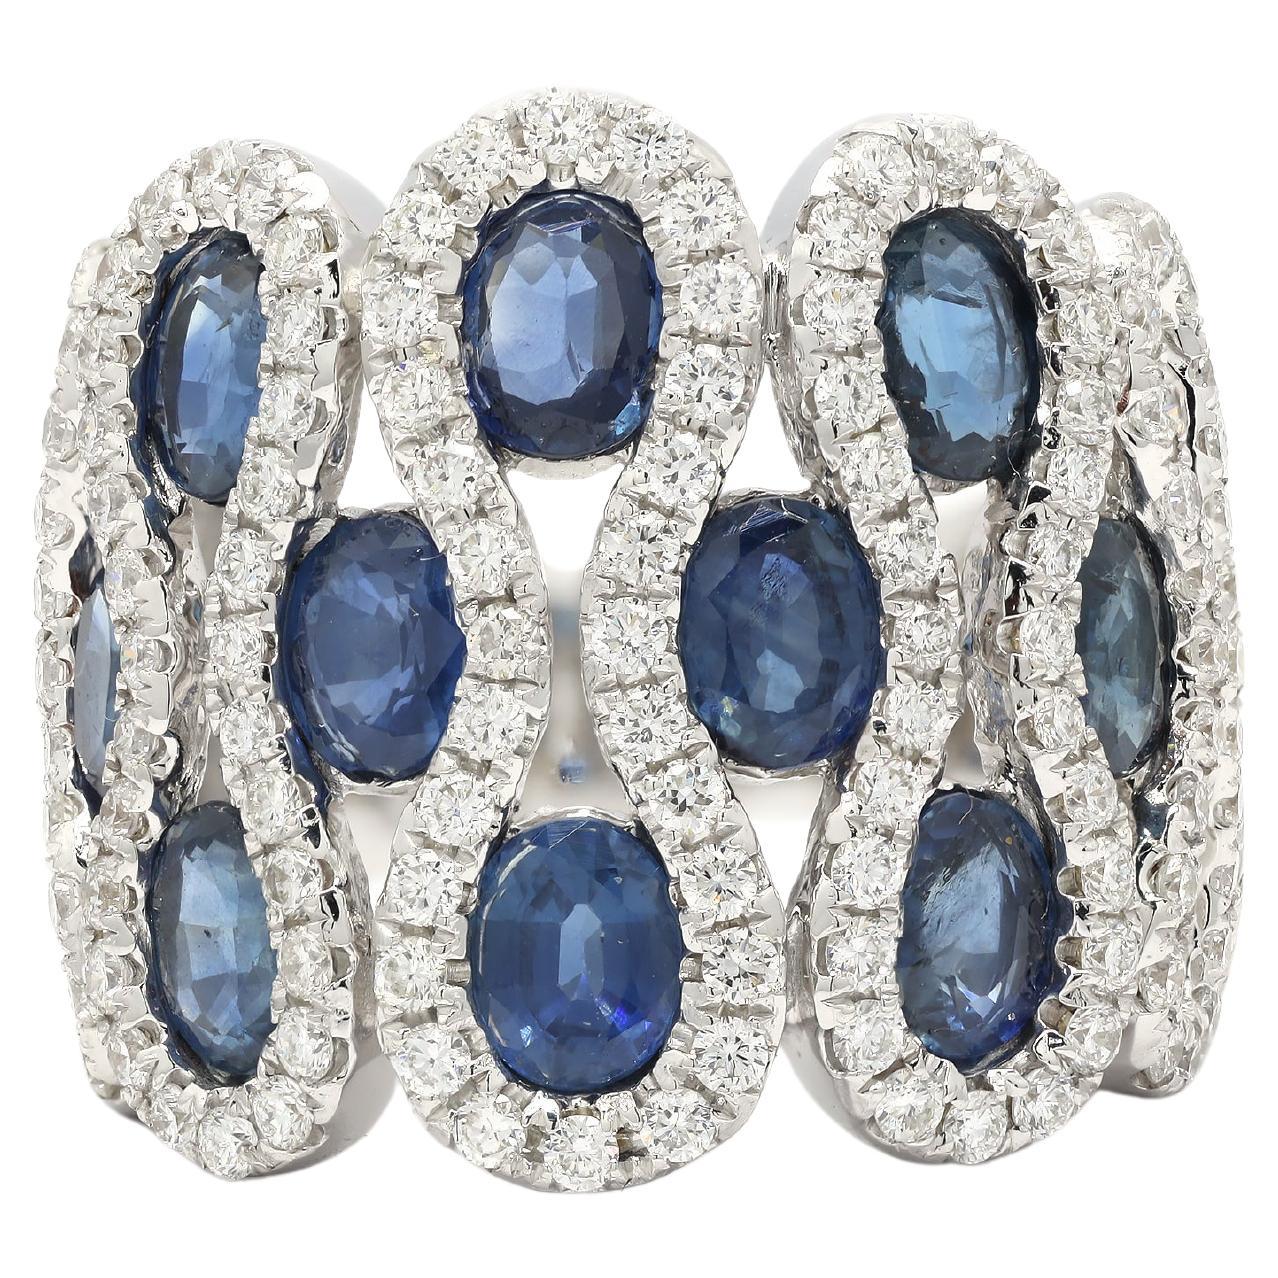 For Sale:  Blue Sapphire Cluster Diamond Ring in 14K White Gold